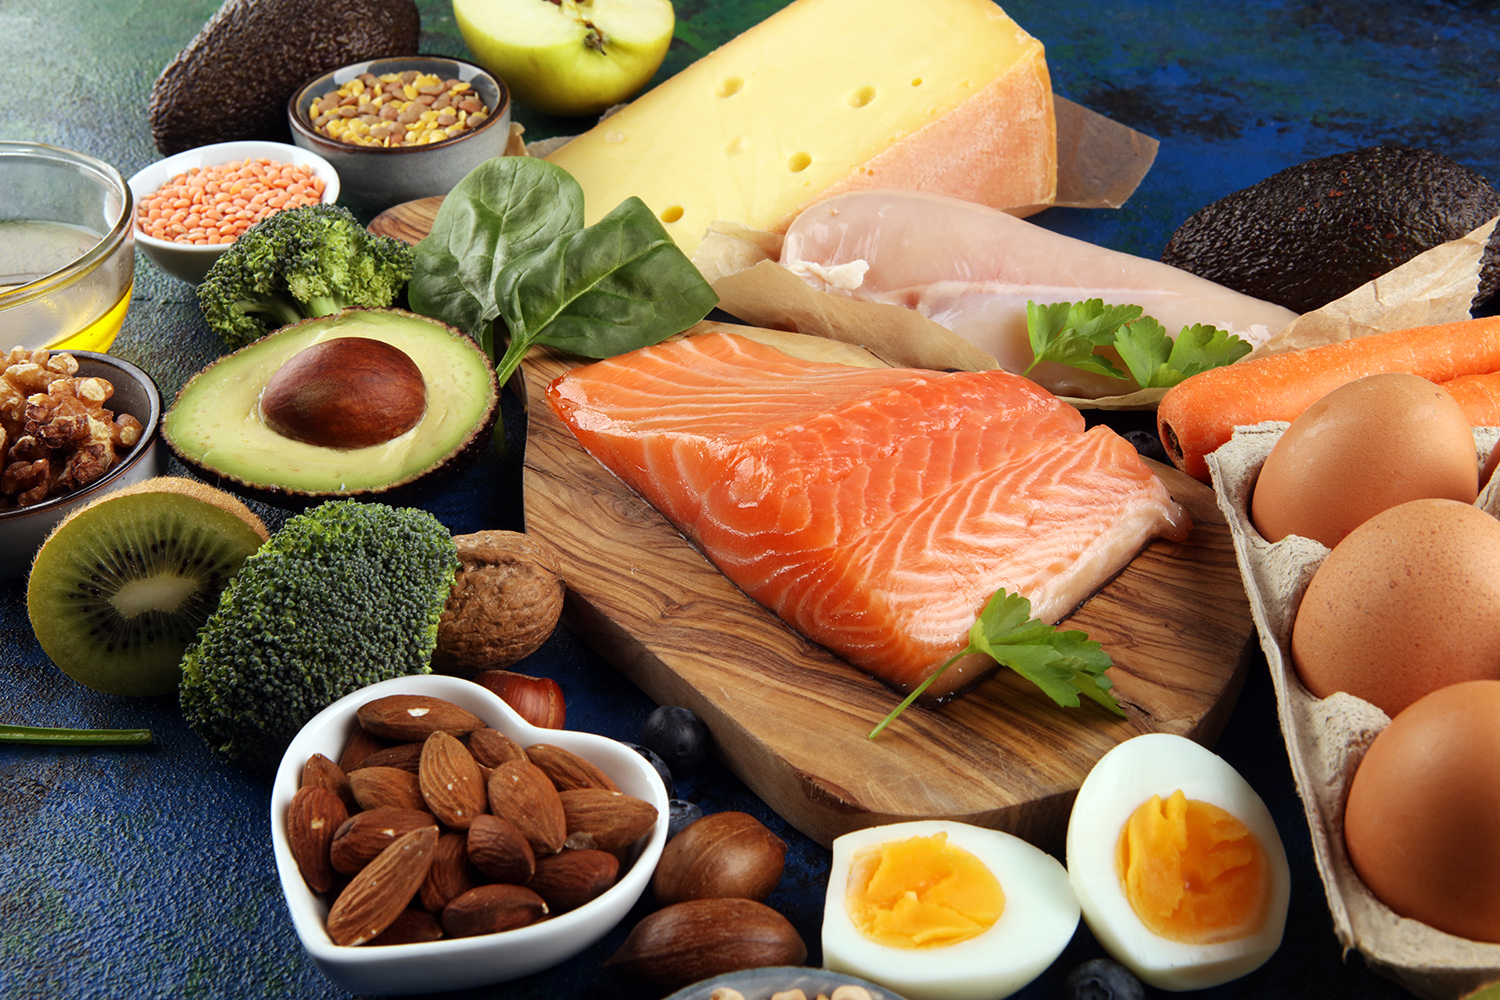 A collection of high protein foods—such as salmon, eggs, almonds, and avocados—are spread out across a table.